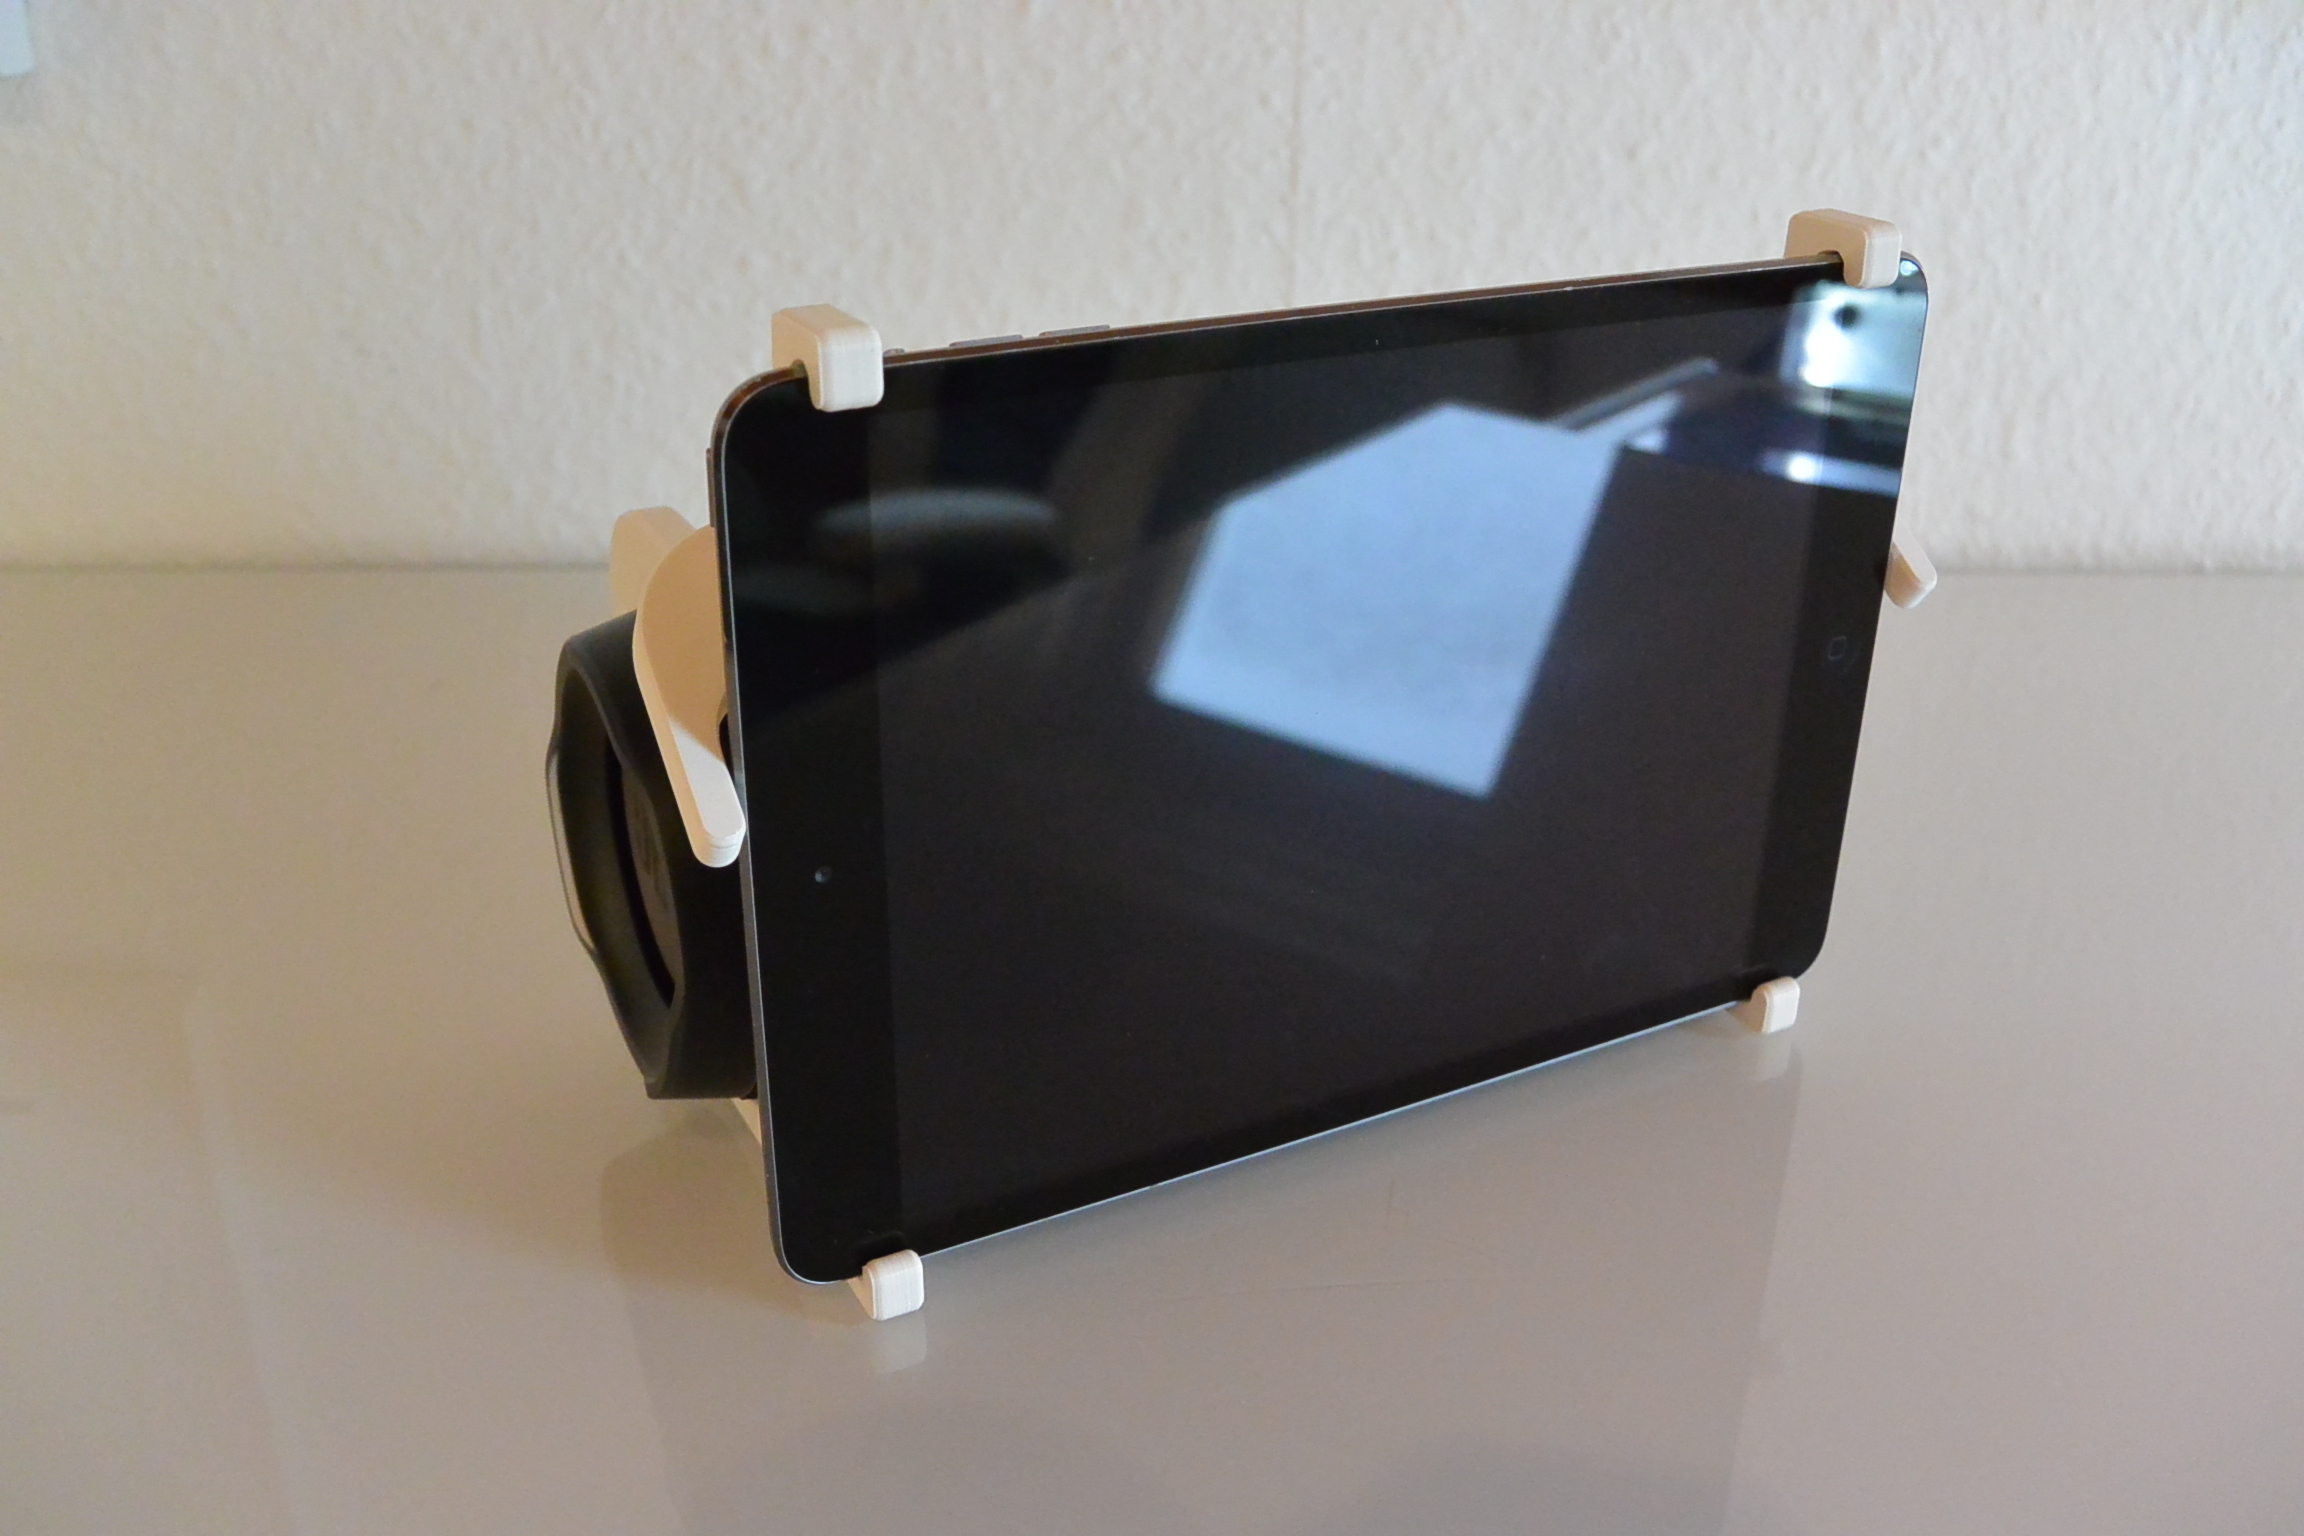 3D Printed iPad JBL Charge Stand by MakeThings3D